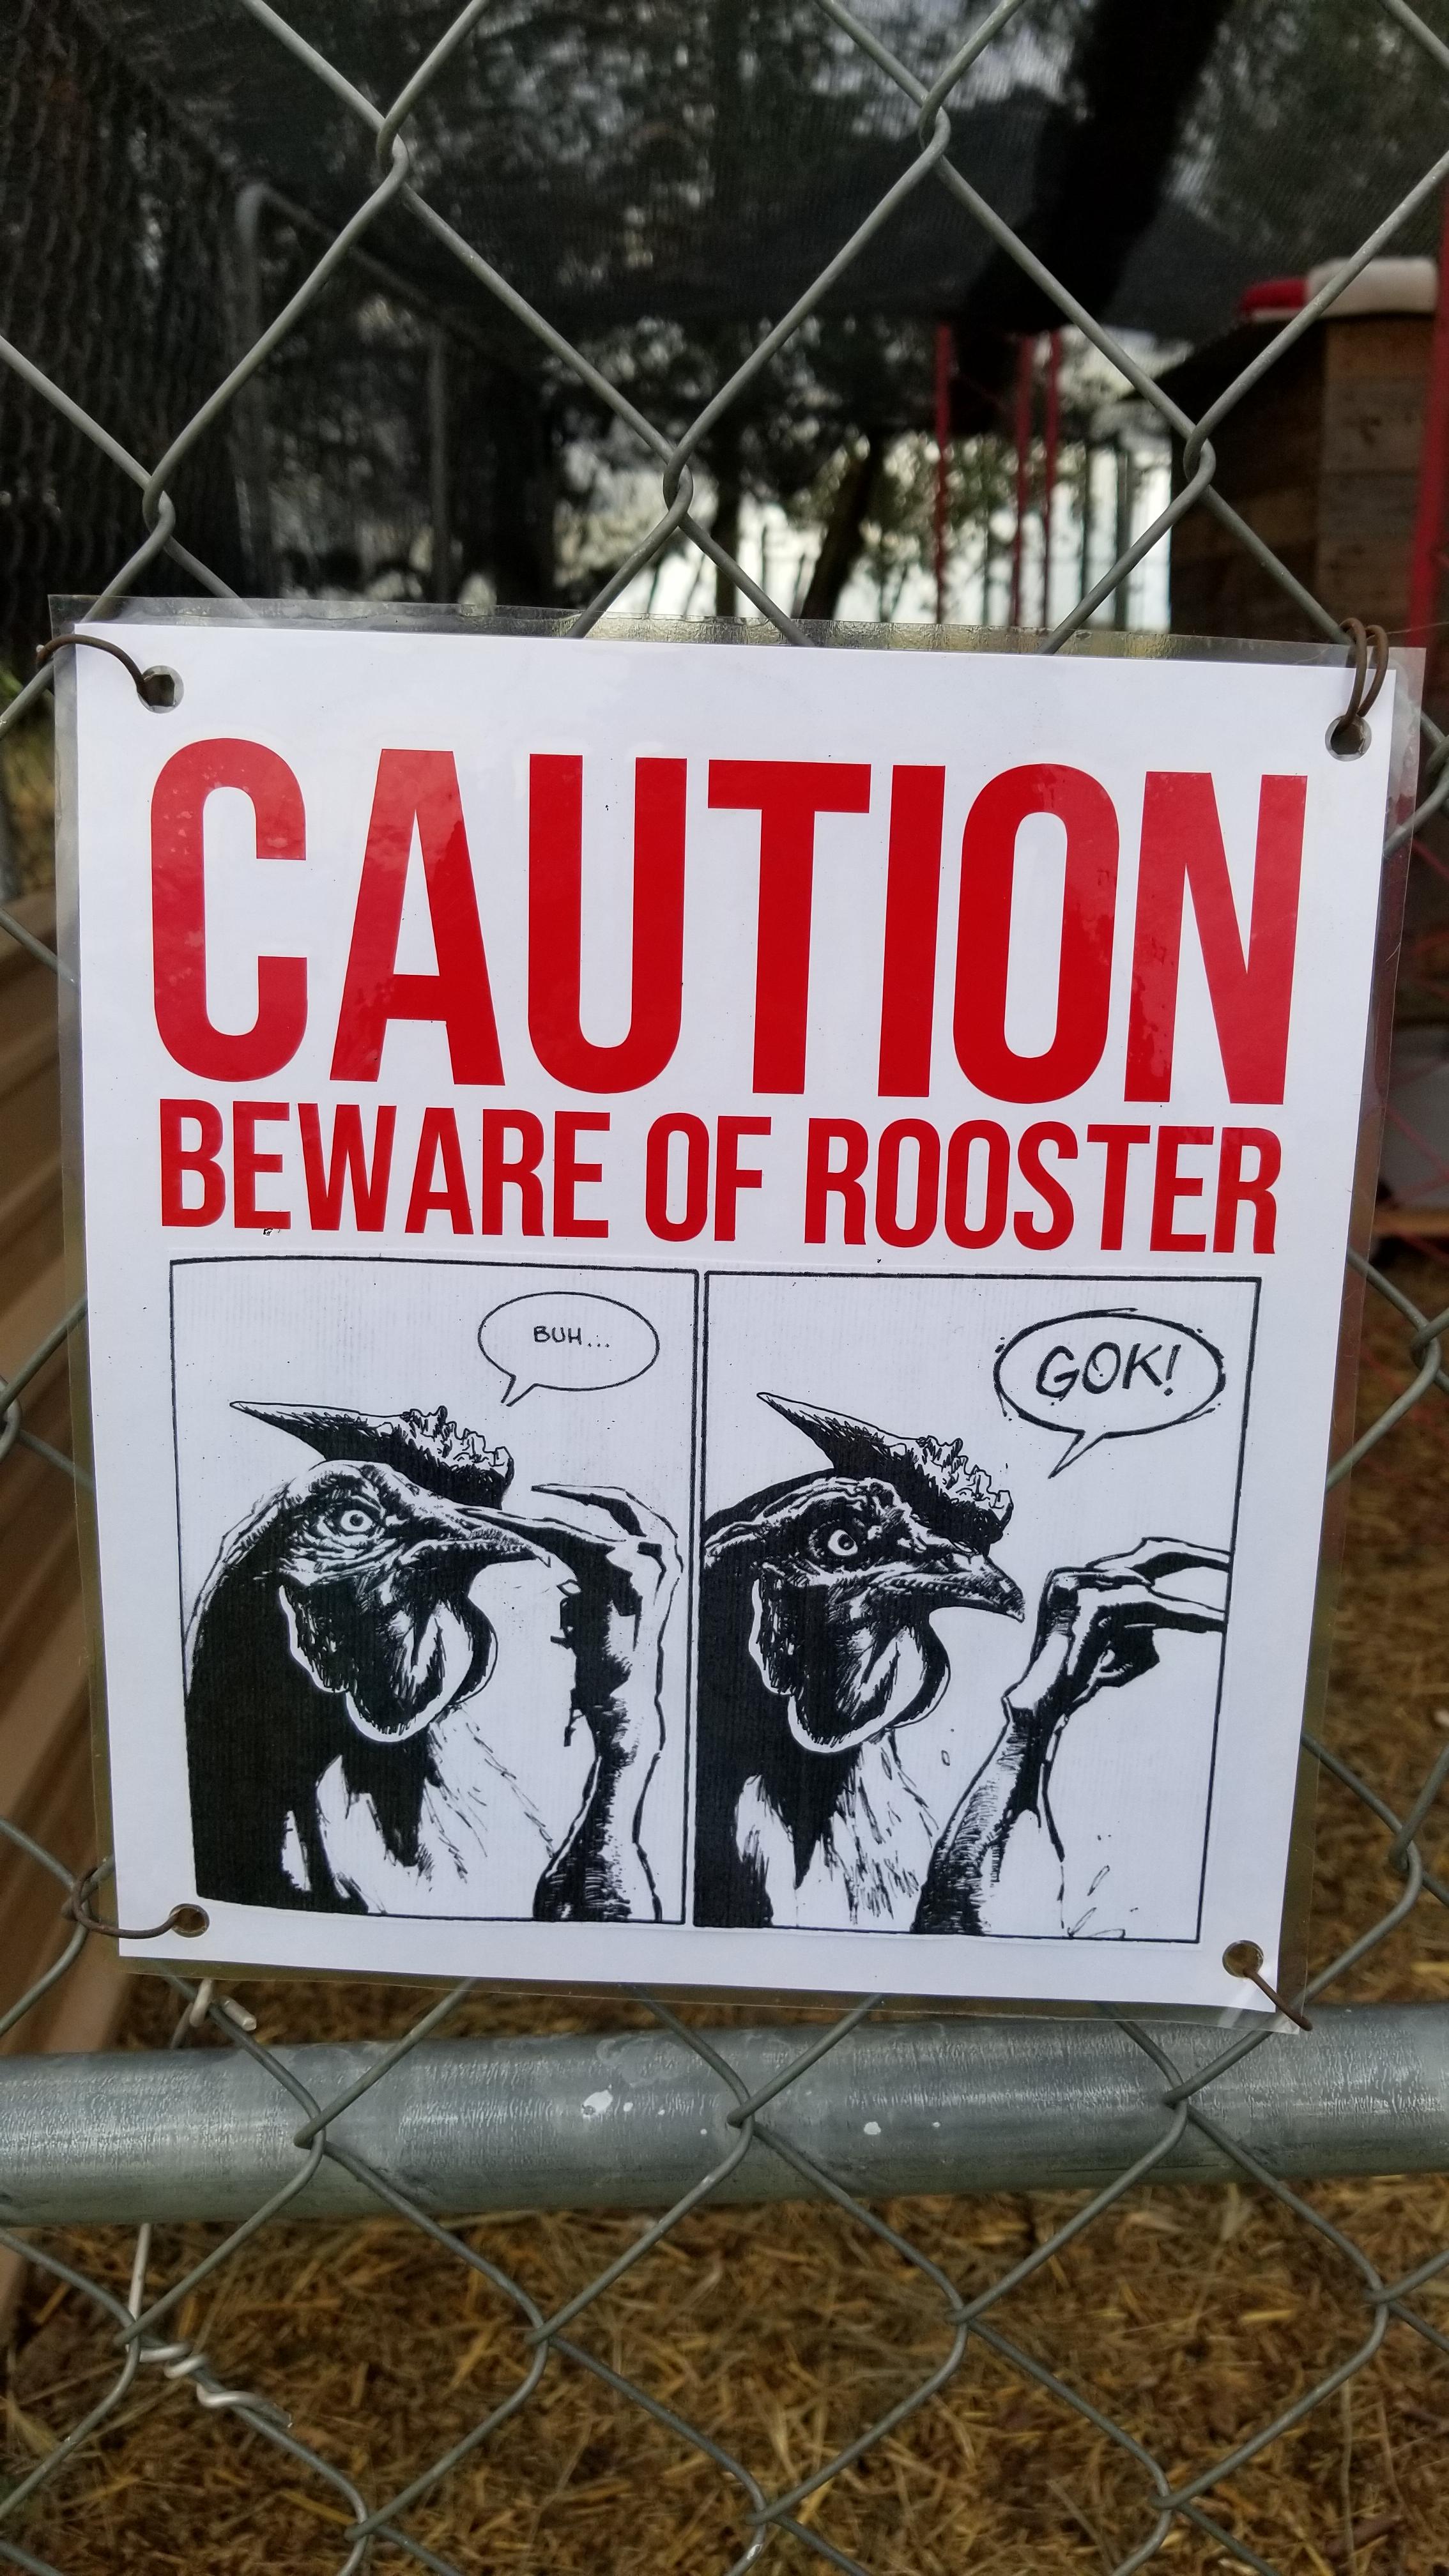 funny memes and random pics -  poster - Caution Beware Of Rooster Gok!